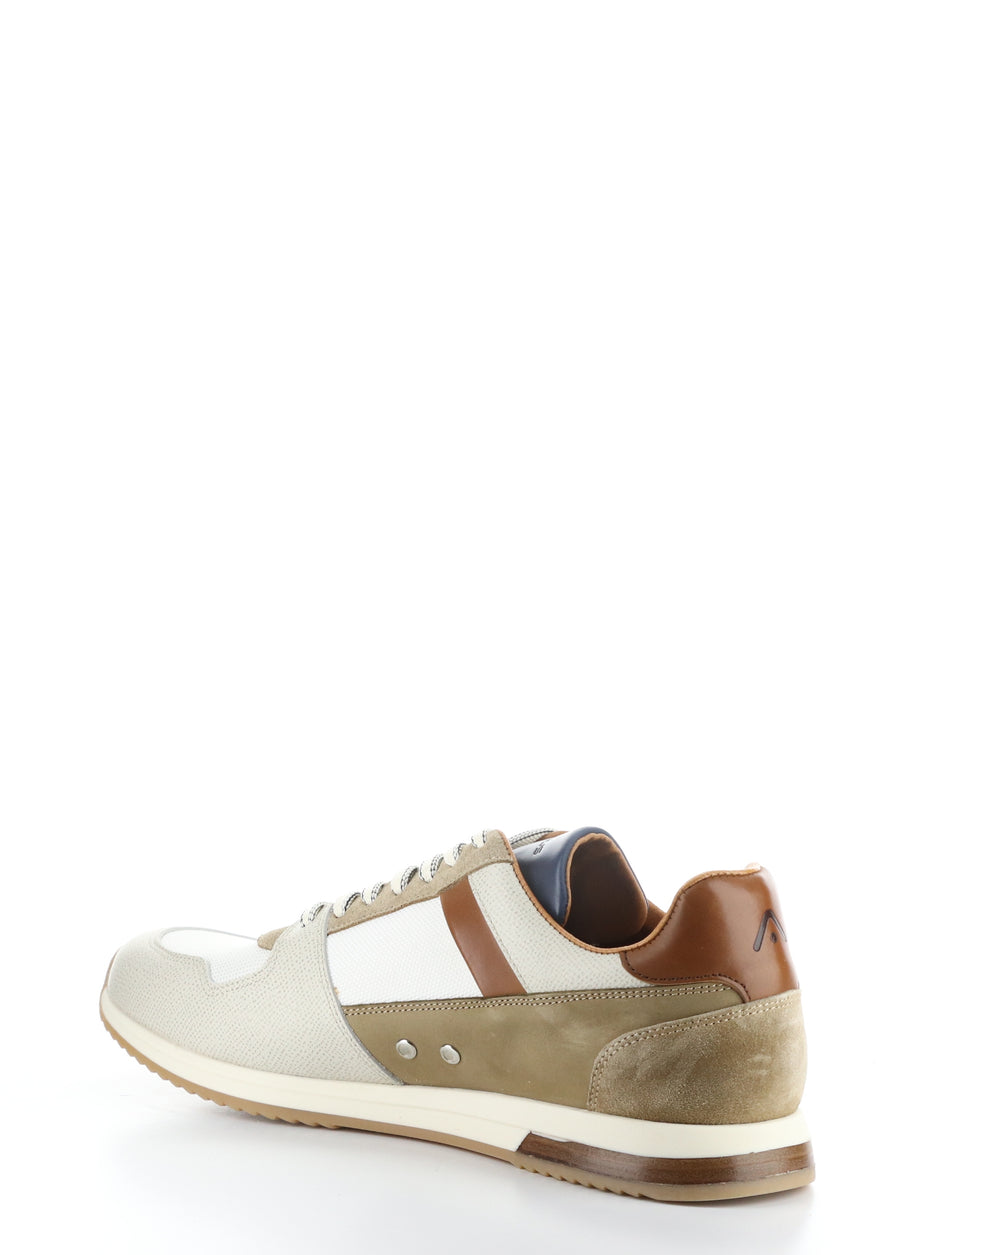 11240 GREY/OFF WHITE/CAMEL Lace-up Shoes